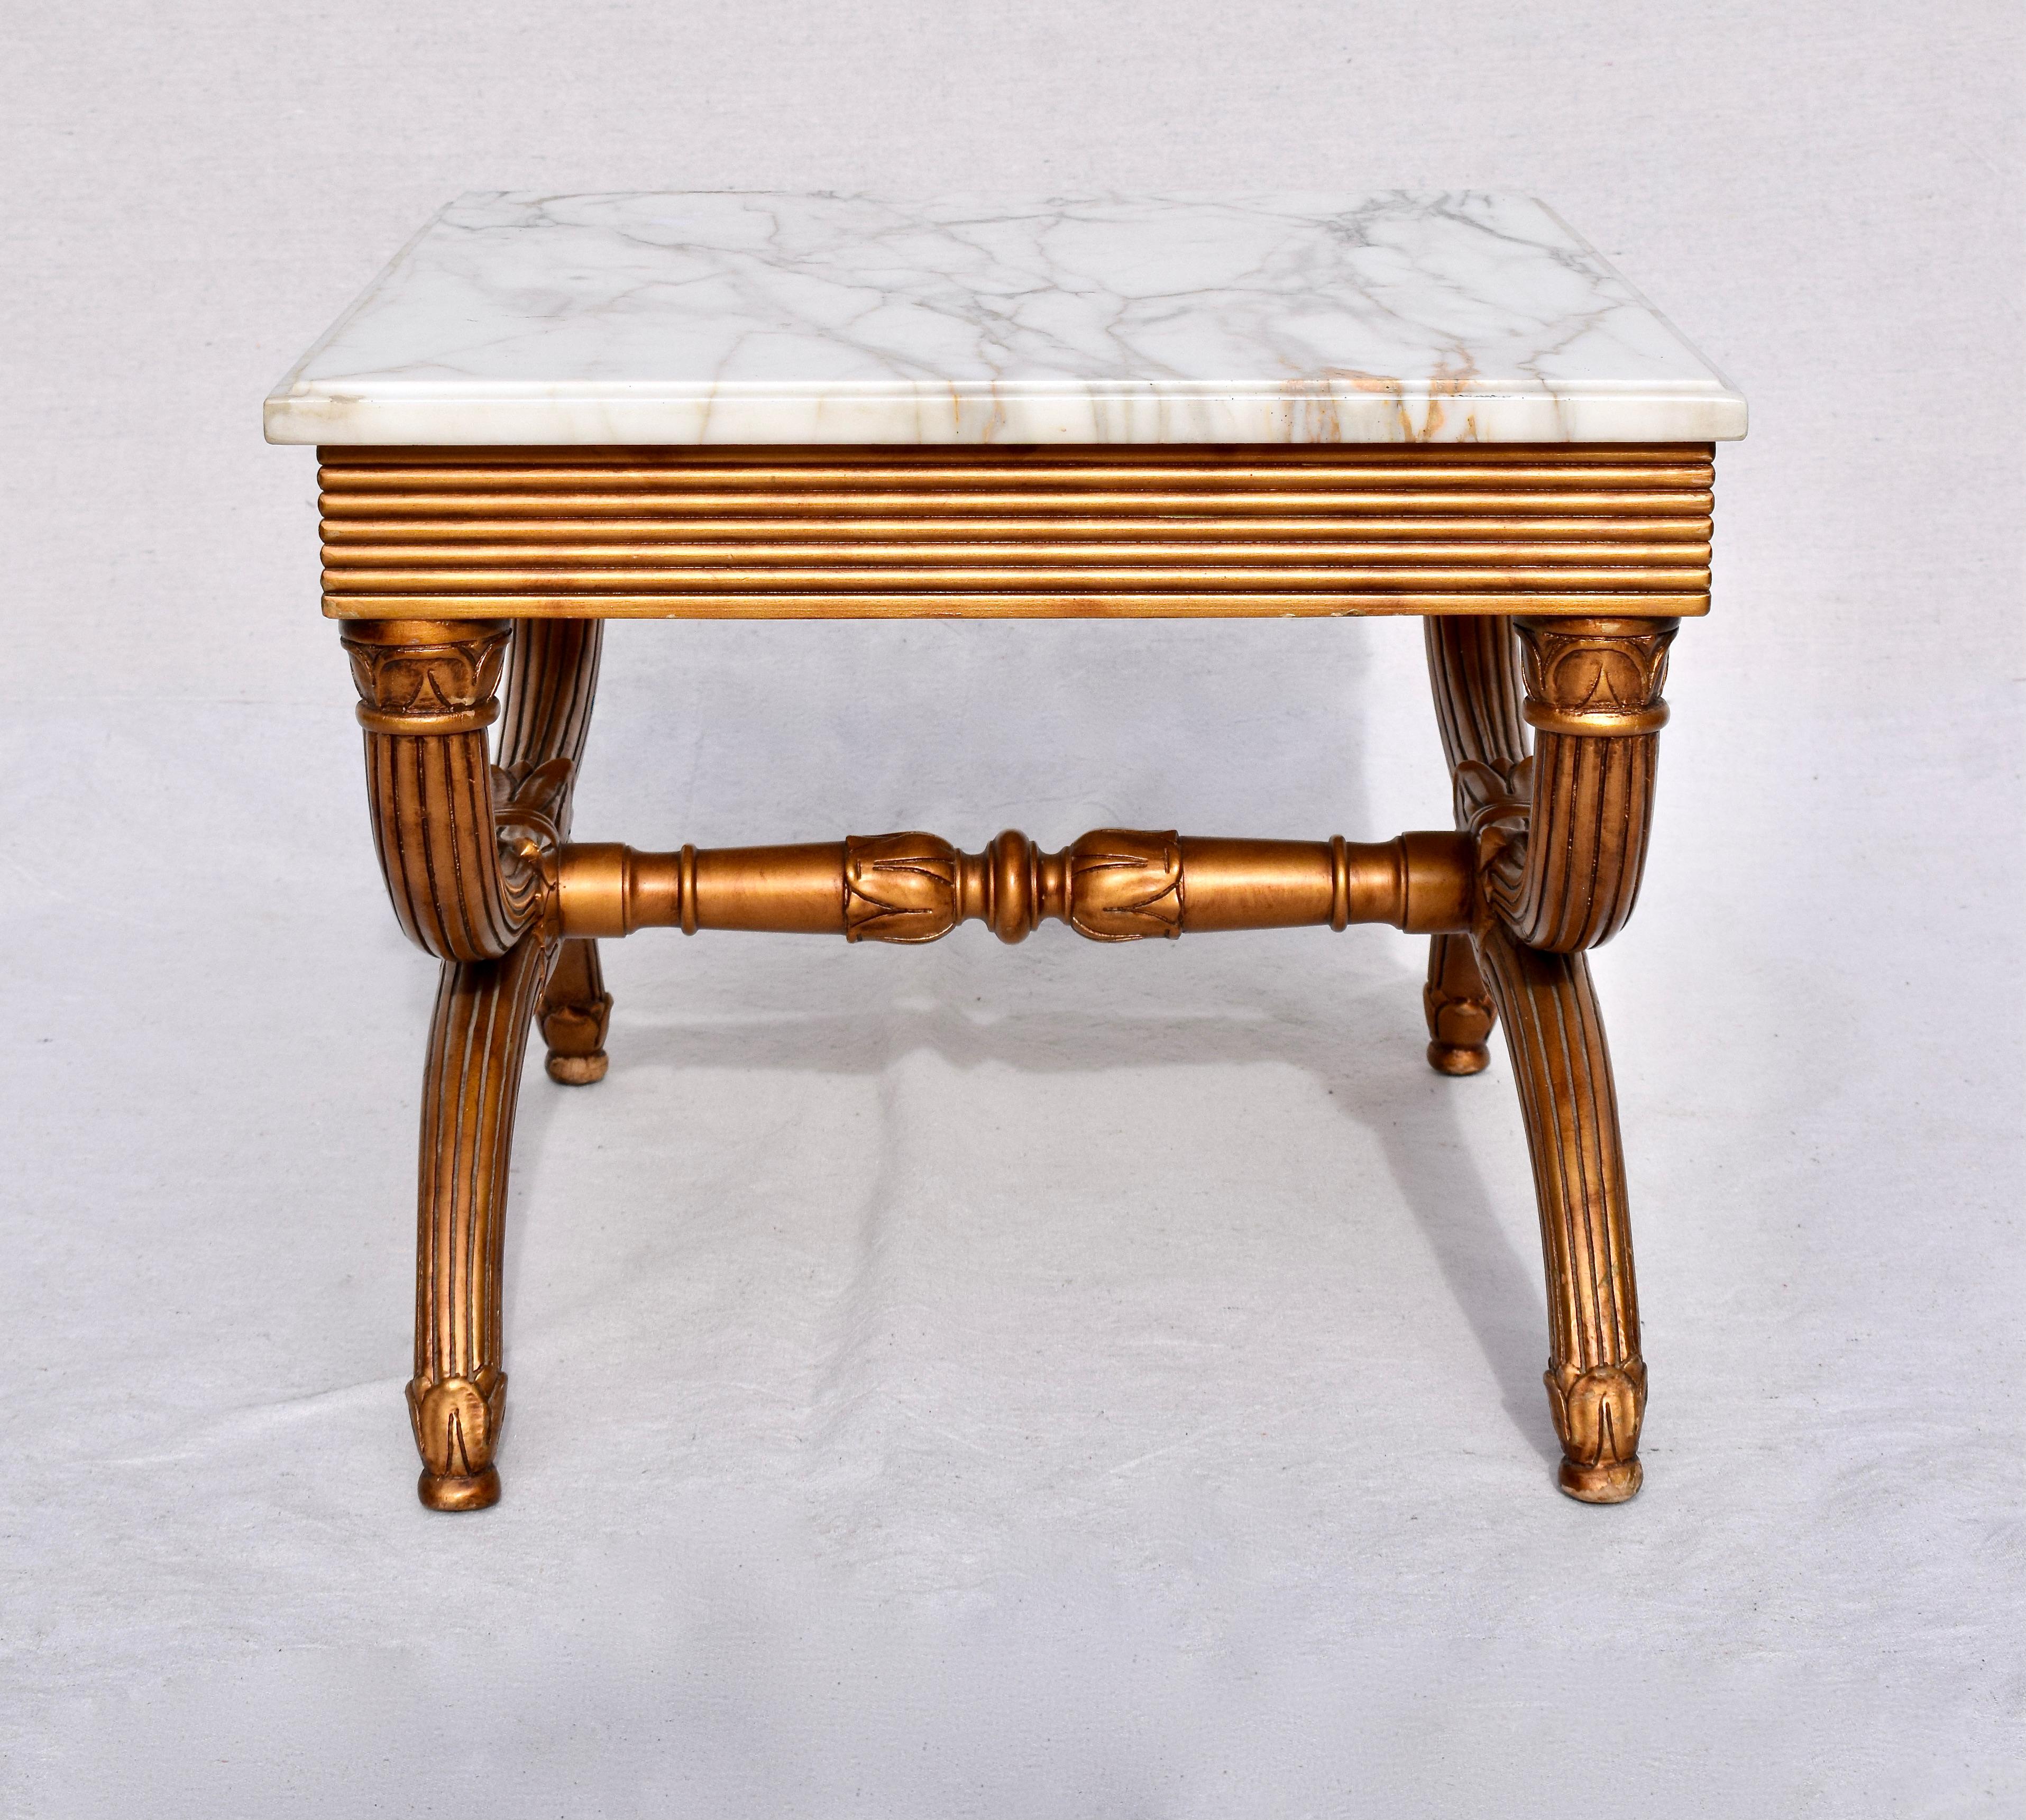 20th Century Neoclassical Style Curule Leg Marble Top Tables, Pair For Sale